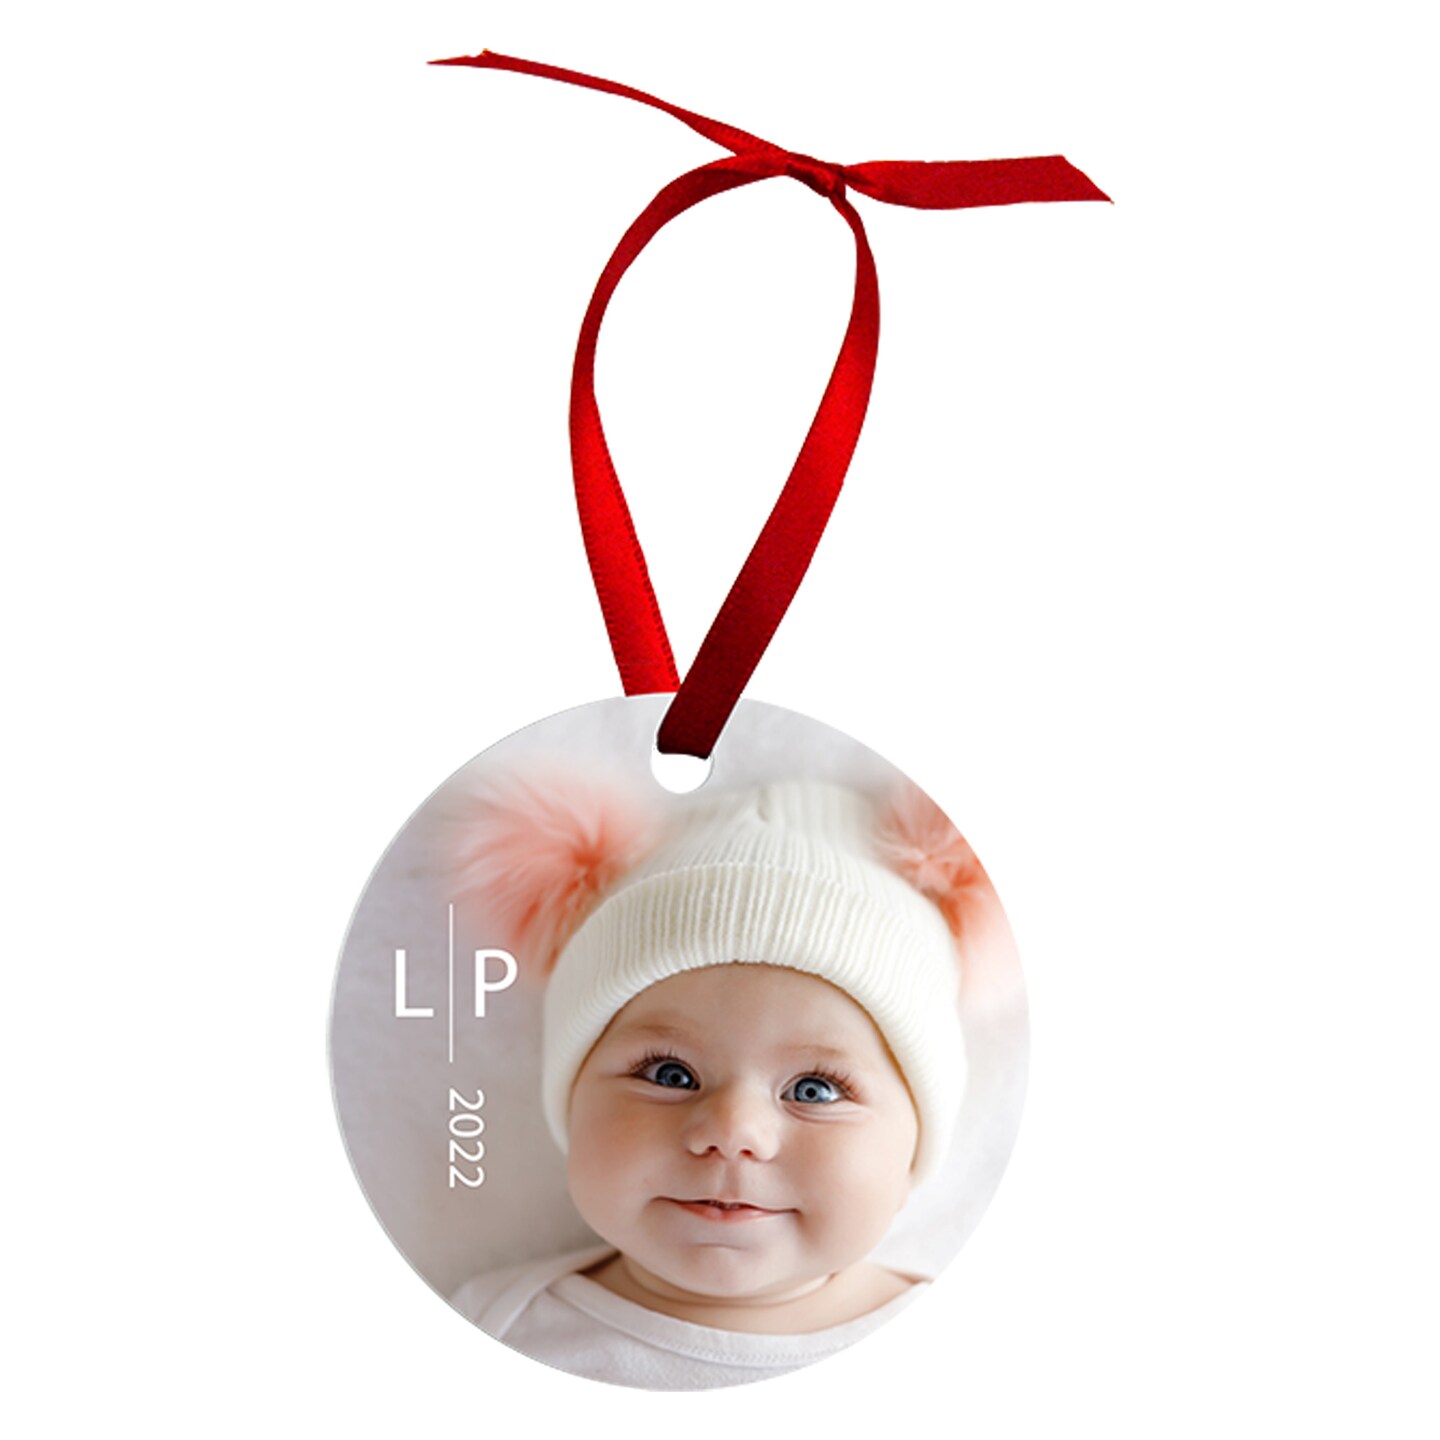 Unisub Round Sublimation Ornaments With White Ribbons White Gloss Coating  For Heat Press Personalized Christmas Sublimation Ornament Blanks For -  2.75 Metallic 1-Sided